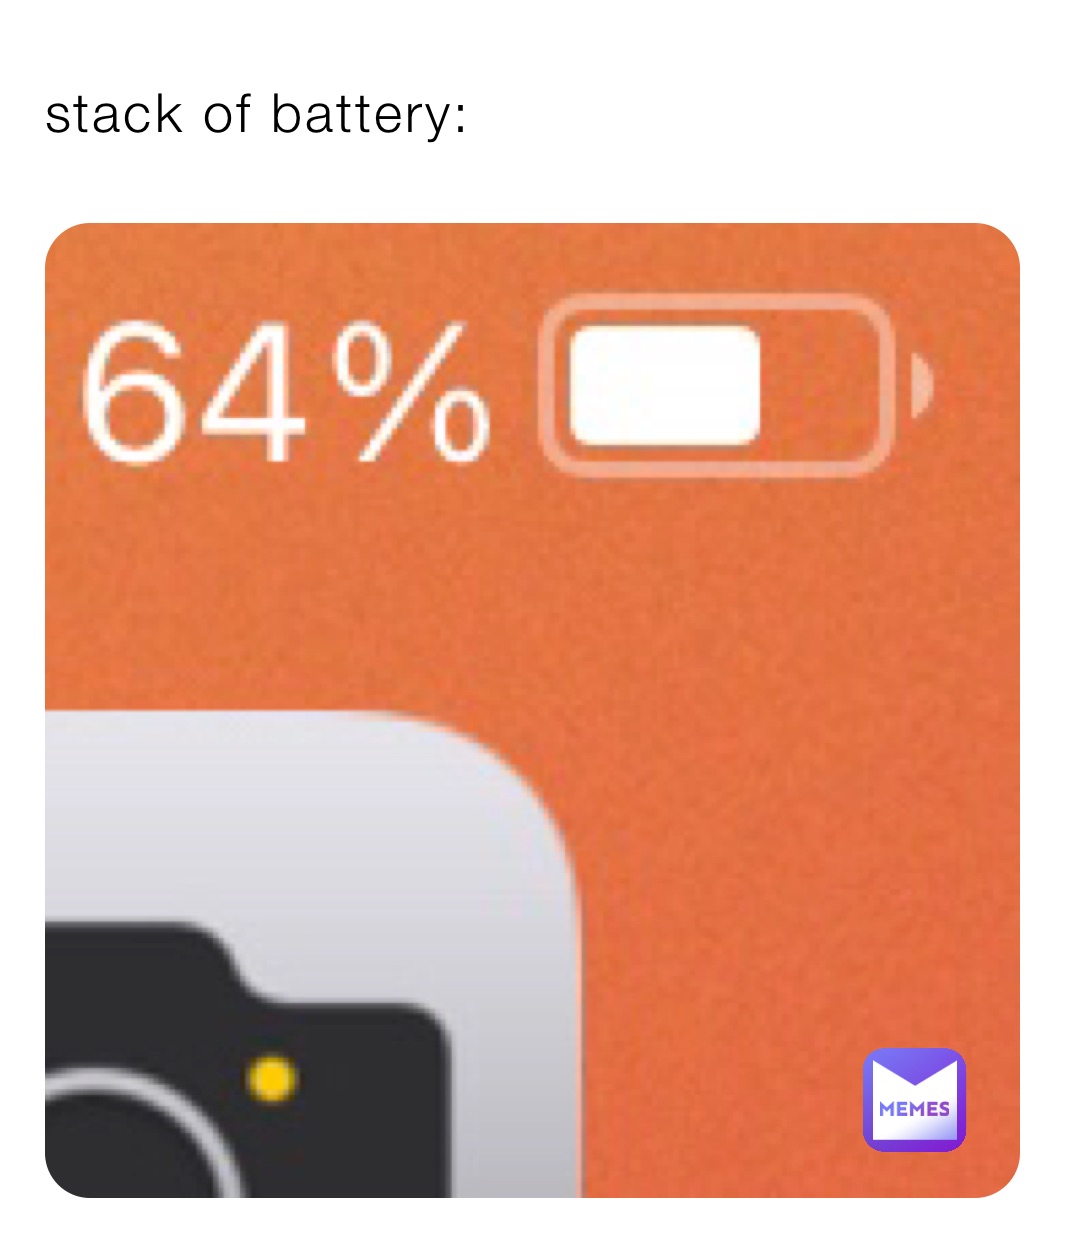 stack of battery: